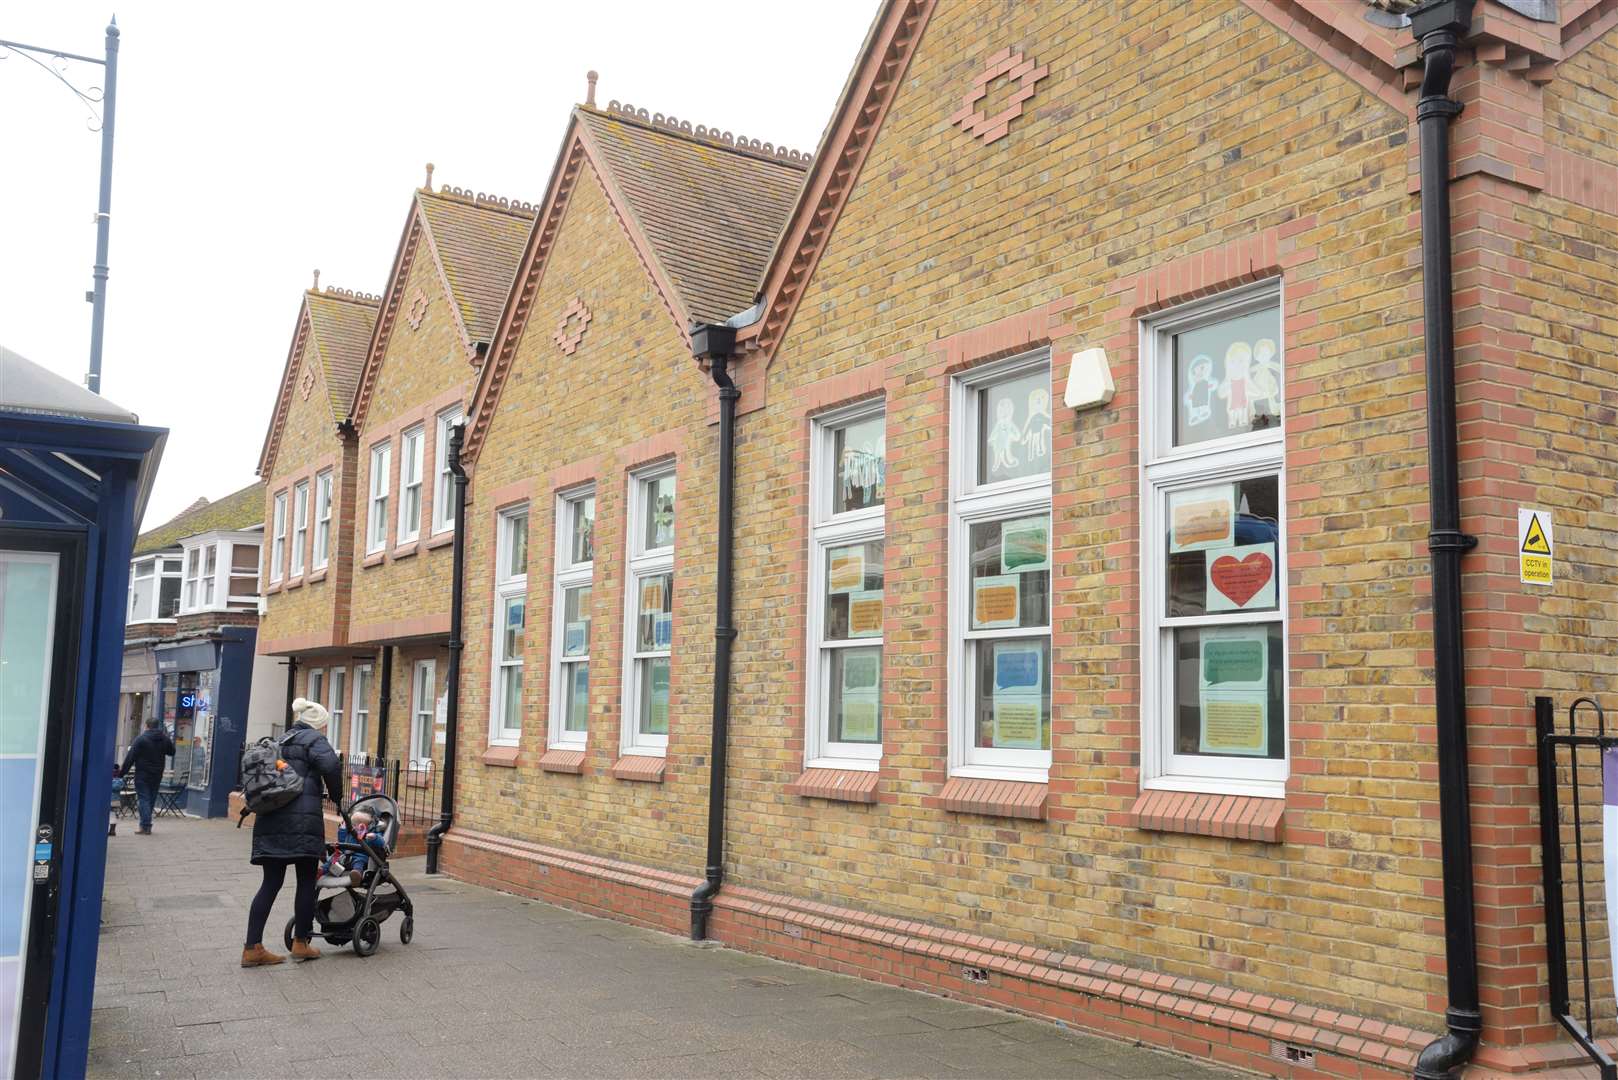 Parents at St Alphege Infant School were told in a letter not to share anxieties with their children. Picture: Chris Davey